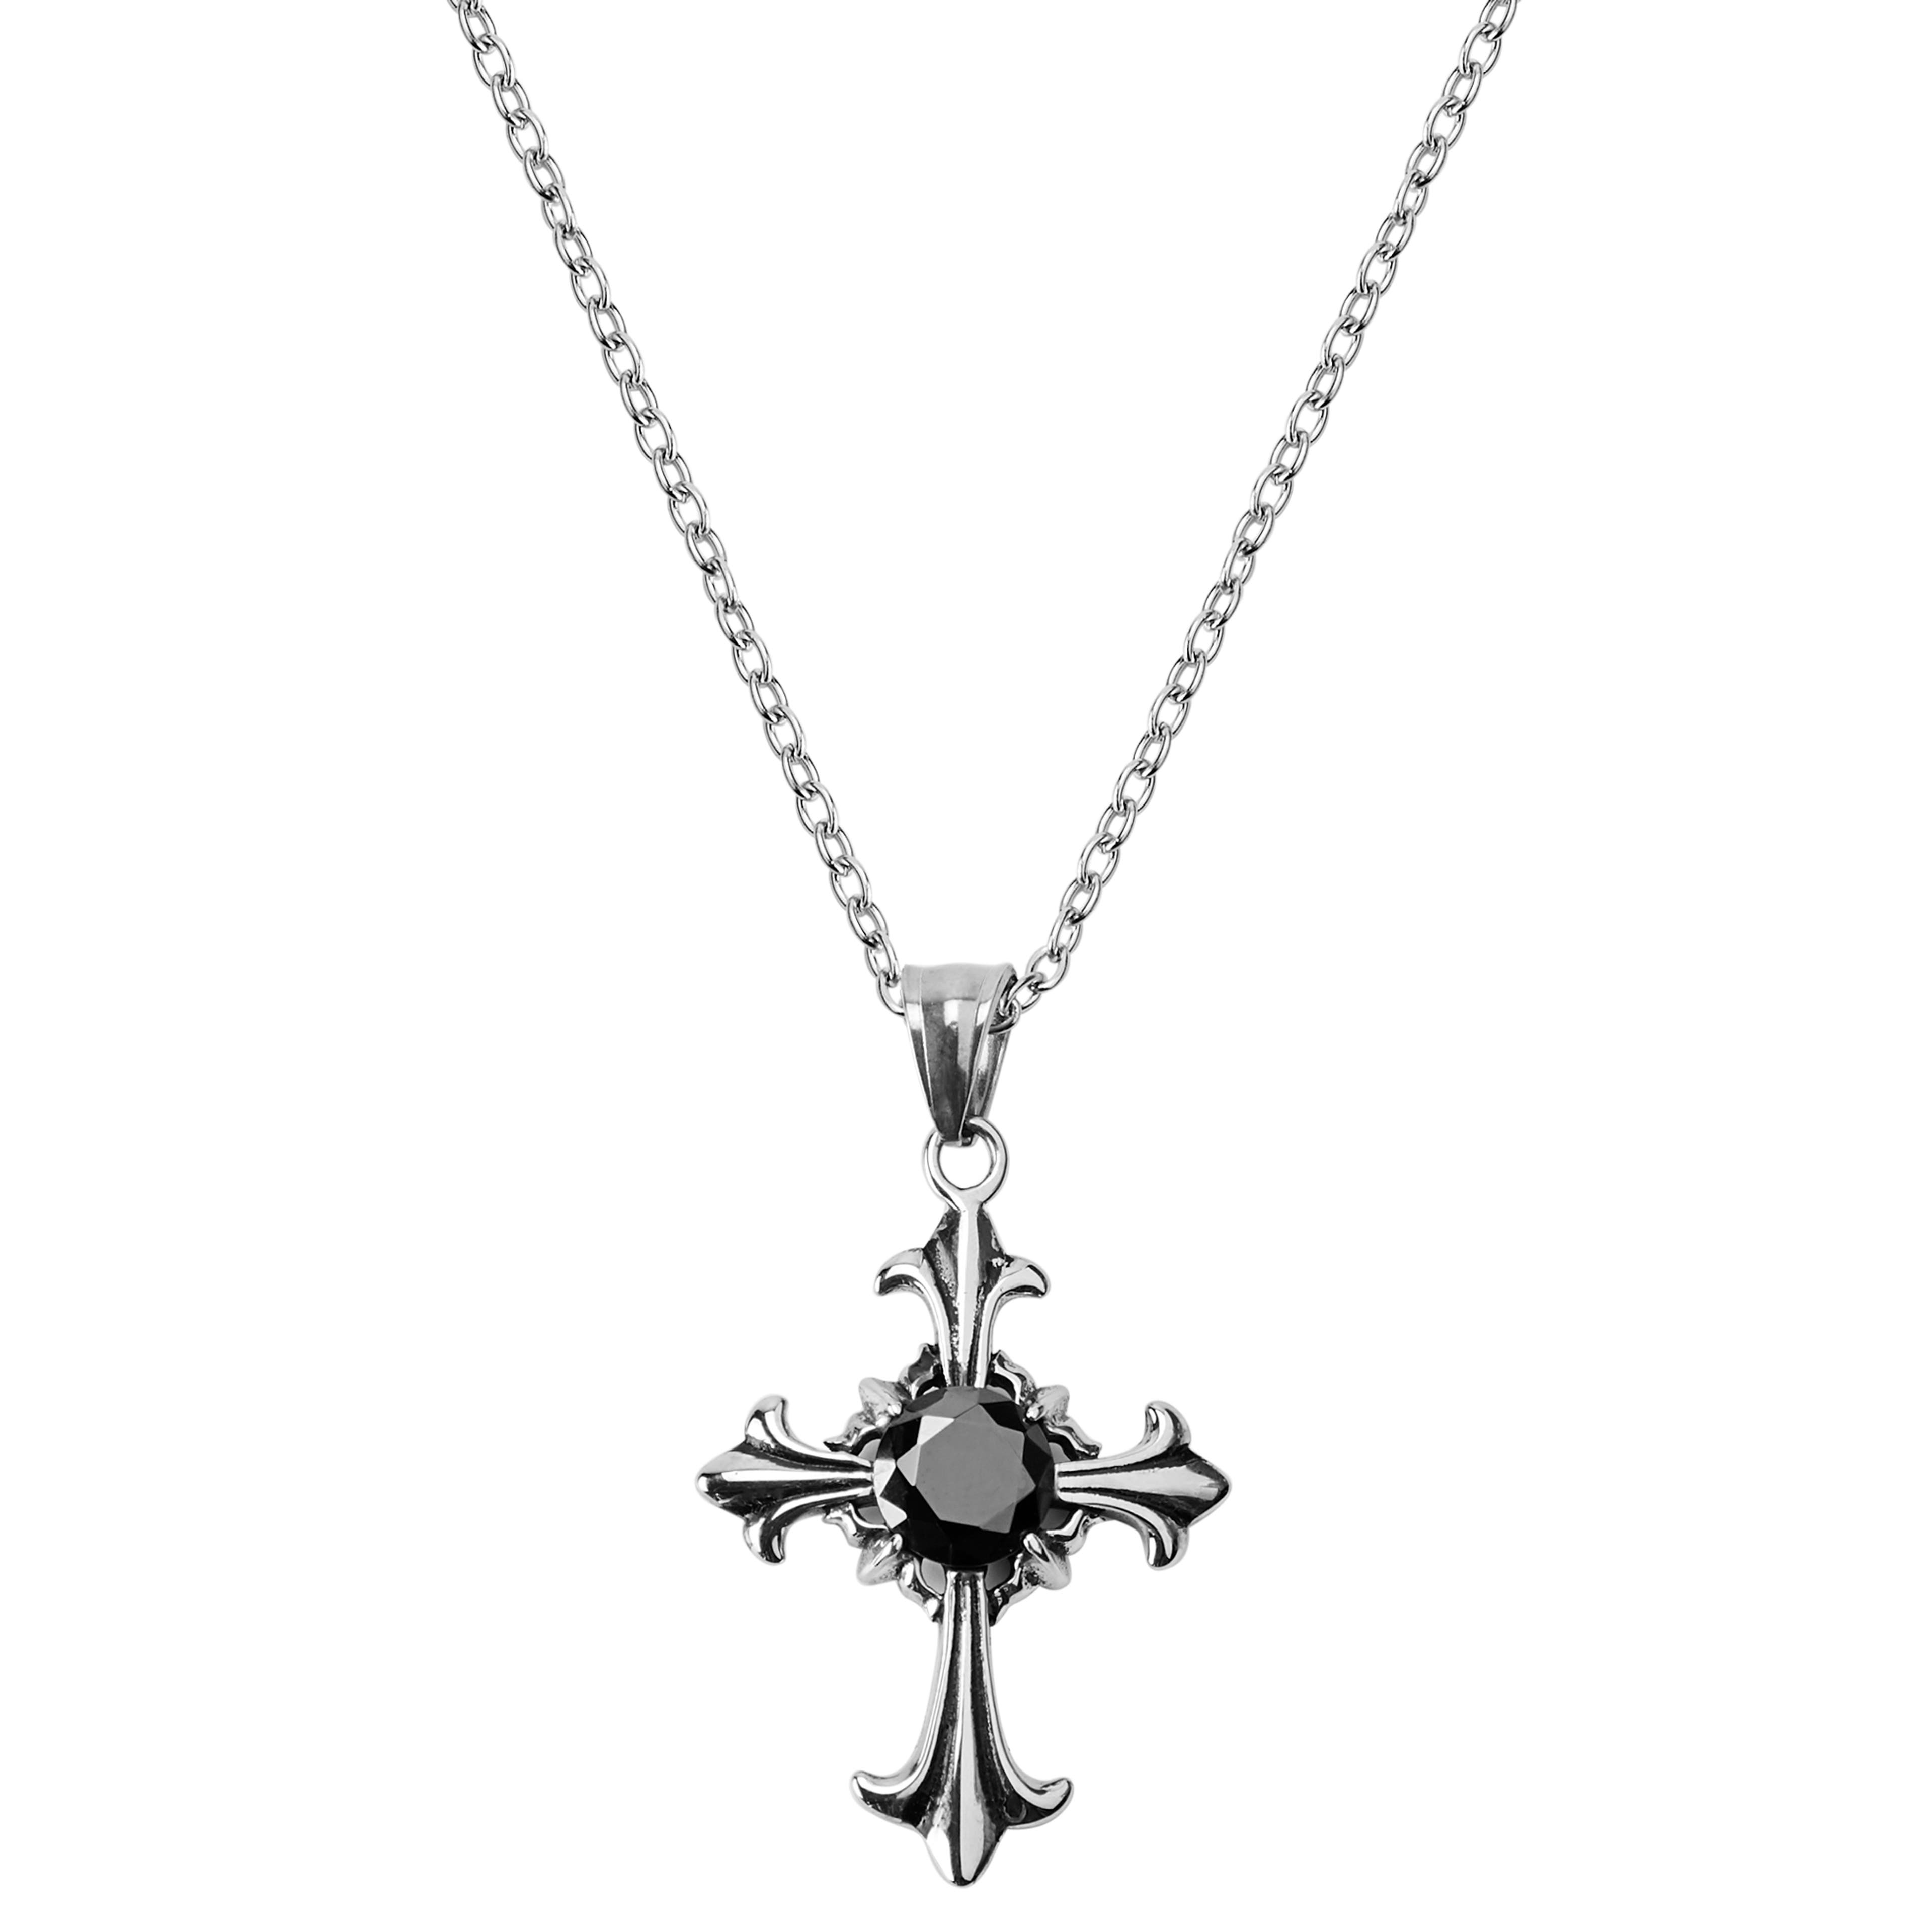 Silver-Tone Stainless Steel Gothic Cross Cable Chain Necklace